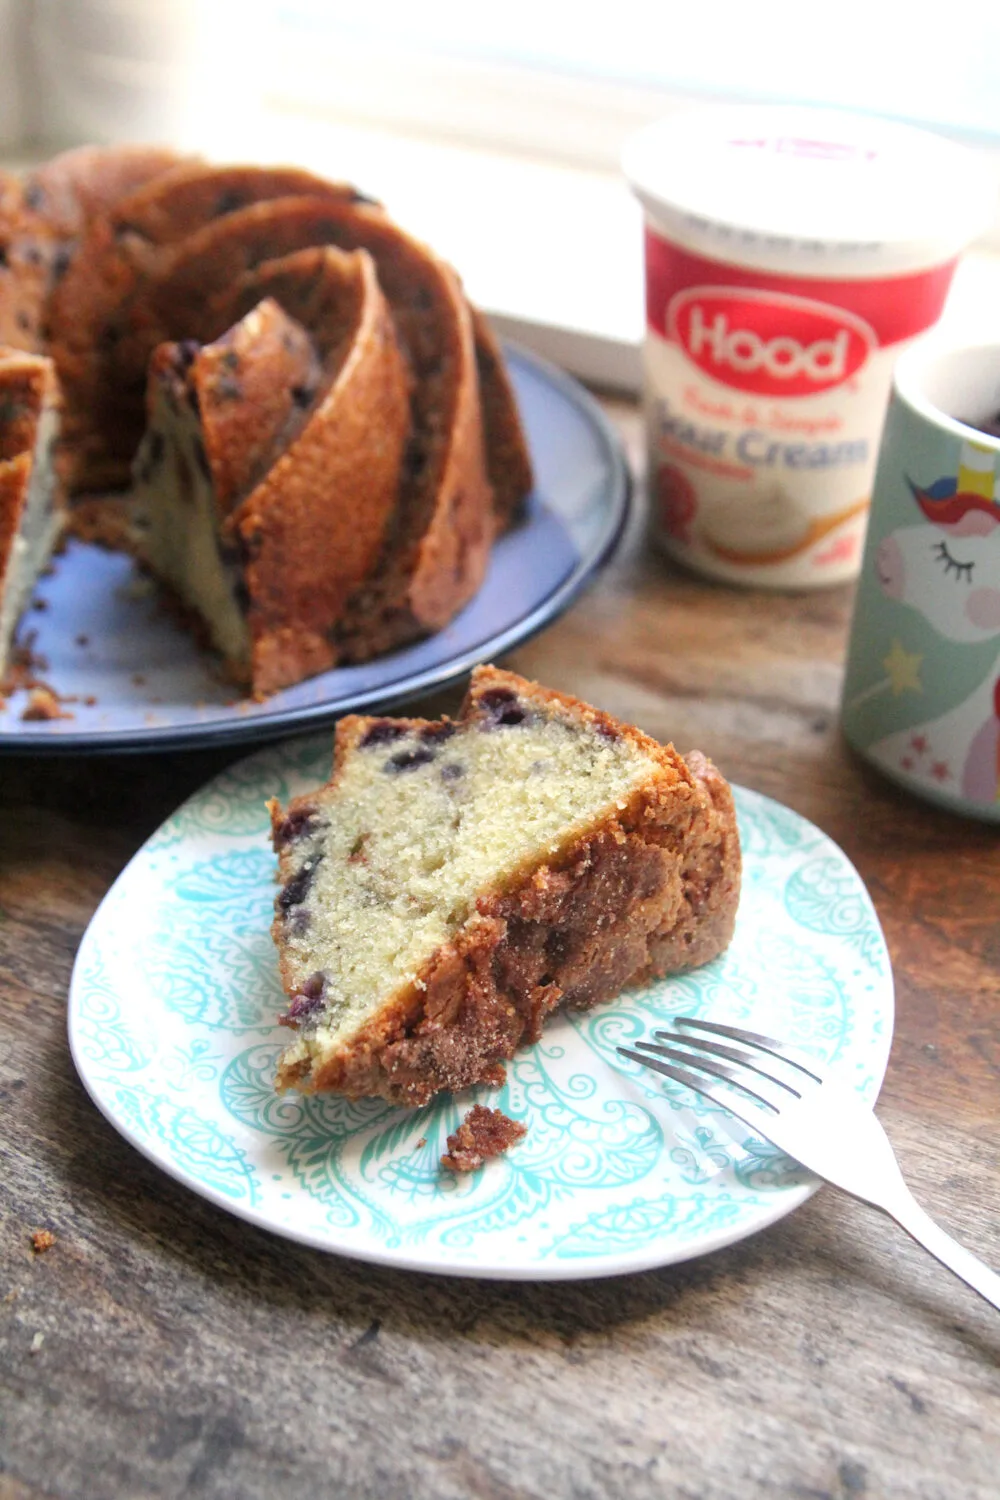 A slice of wild blueberry poundcake is on a small plate. The rest of the cake is on a big plate. Hood Sour Cream and a unicorn measuring cup sit nearby.